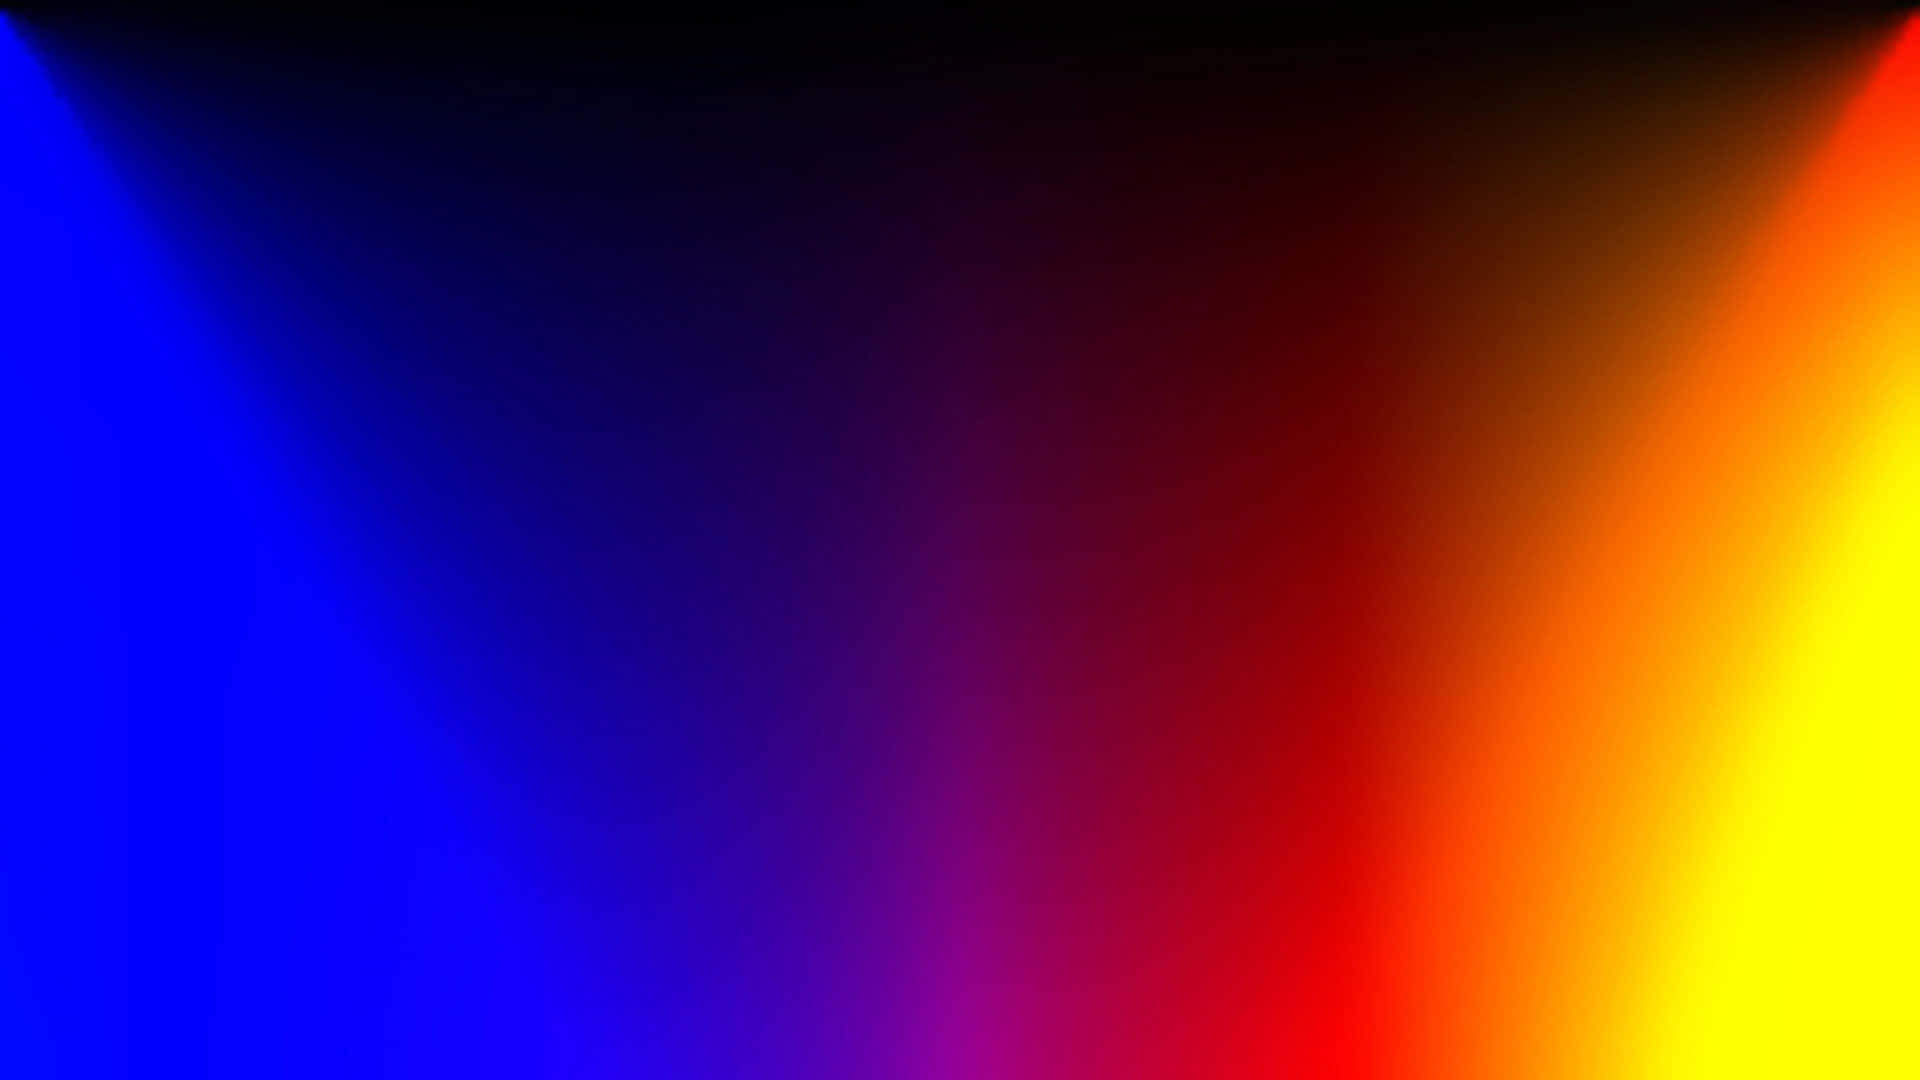 A Vibrant Orange and Blue Abstract Background